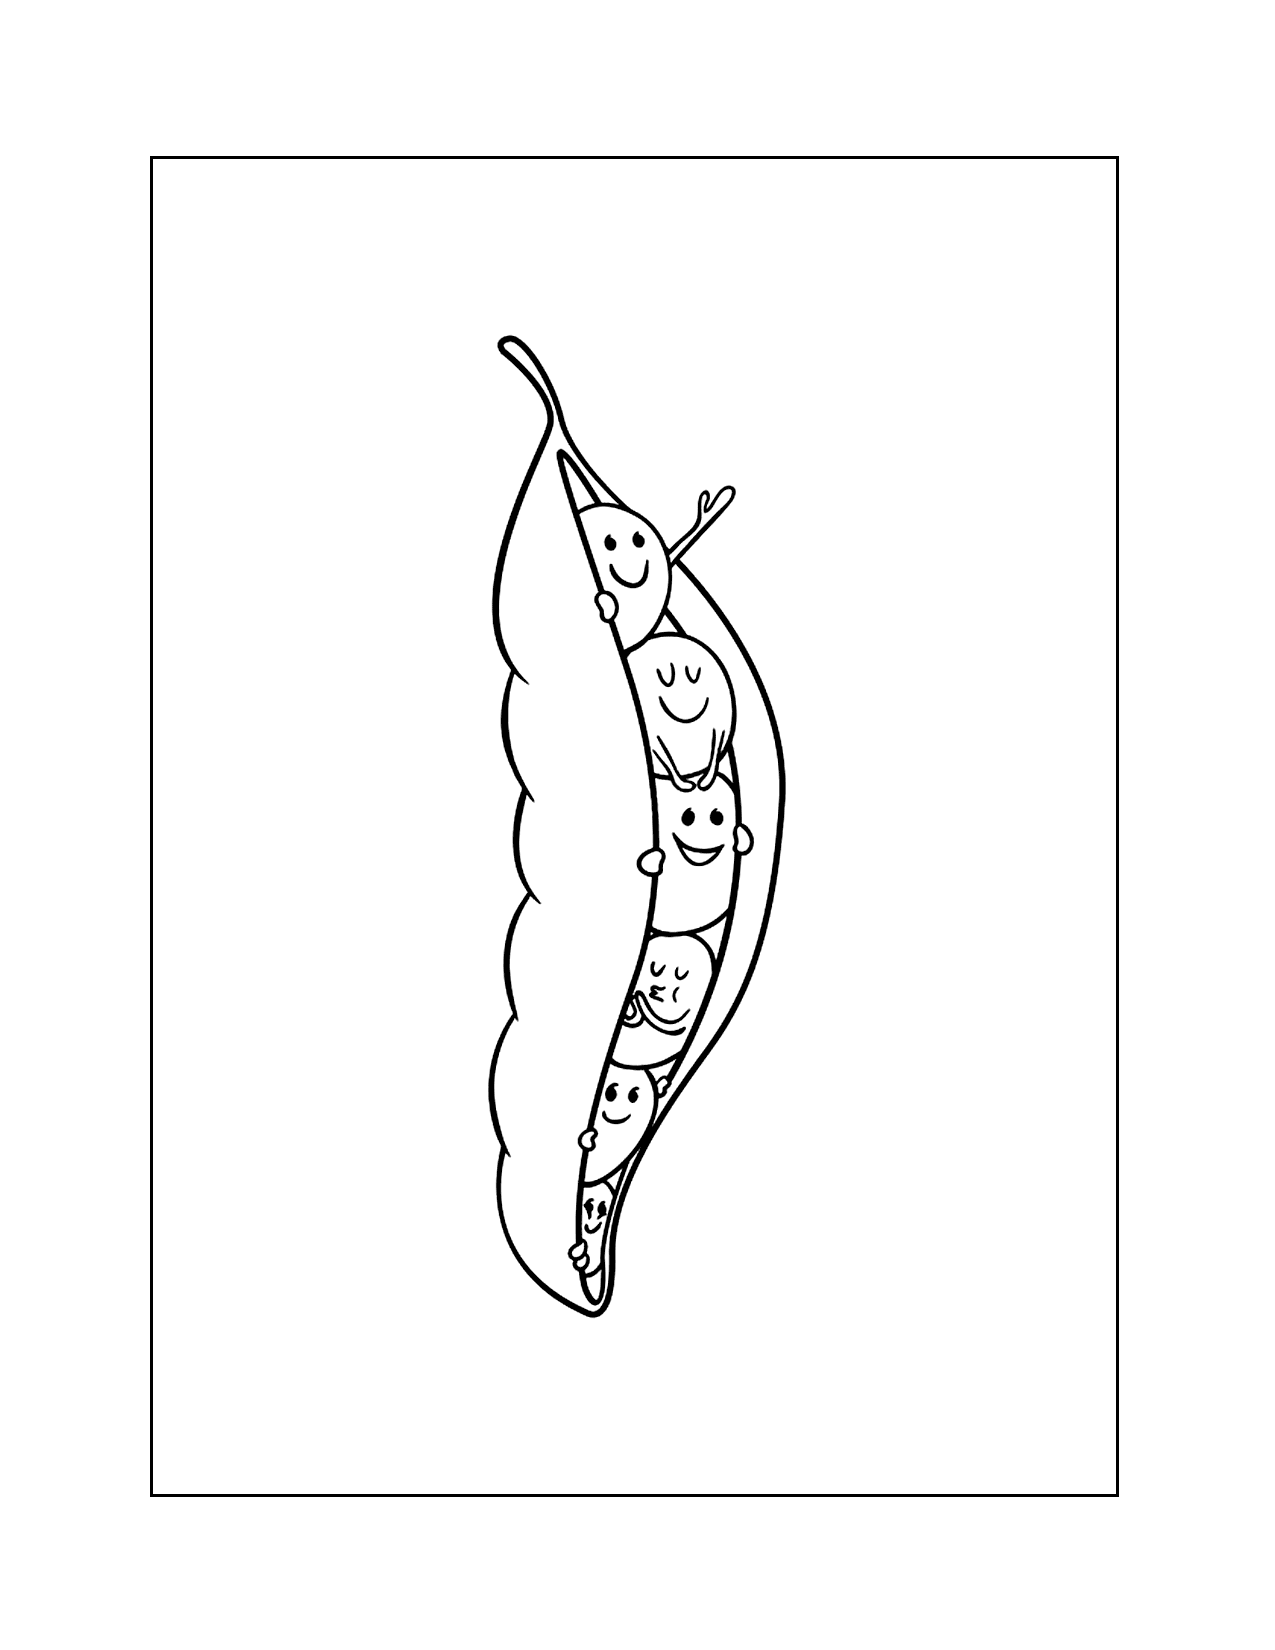 Adorable Peas In A Pod Coloring Page